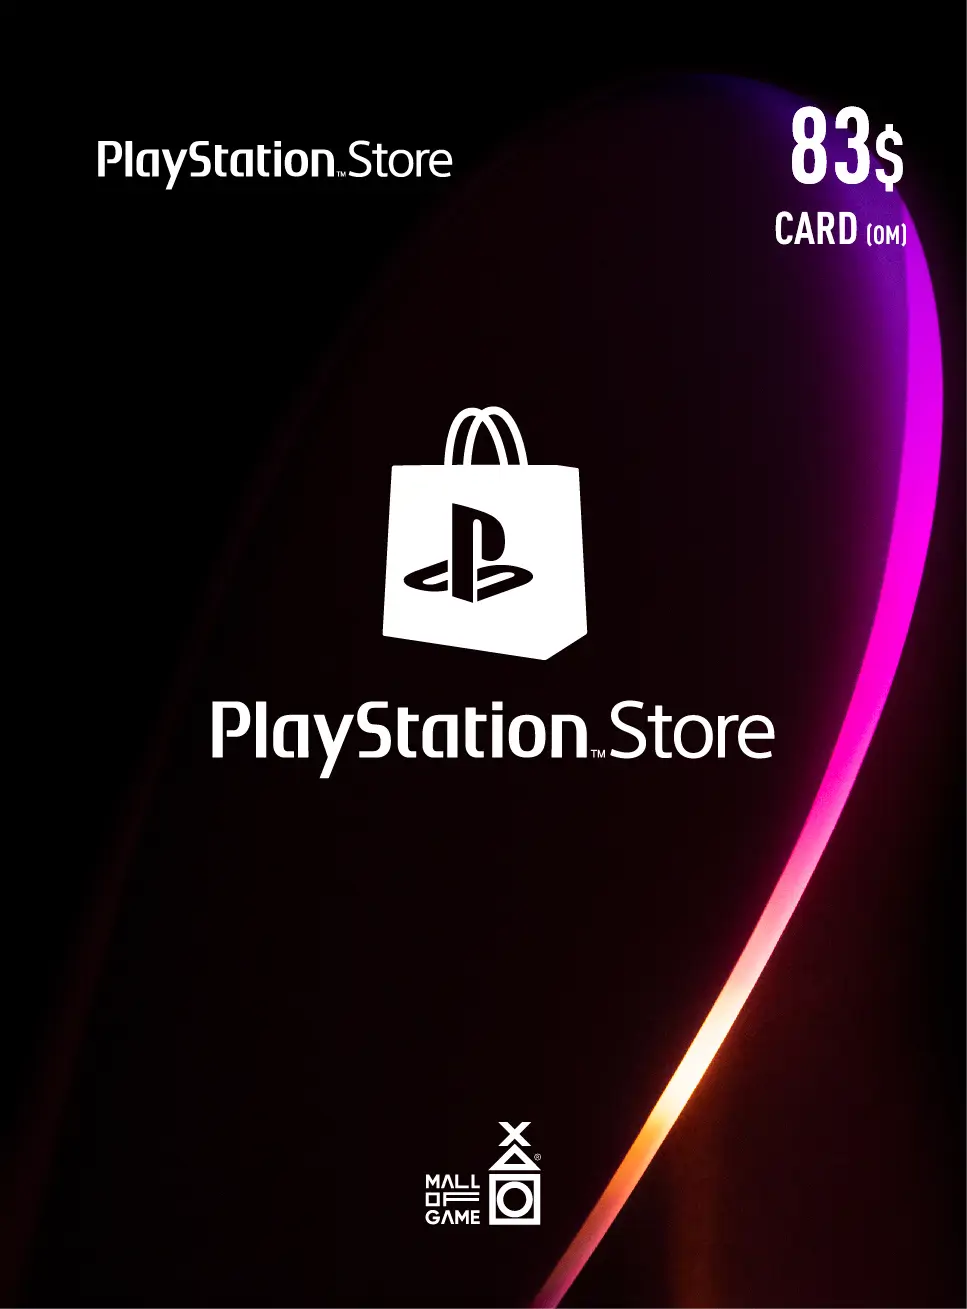 PlayStation™Store USD83 Gift Cards (OM)